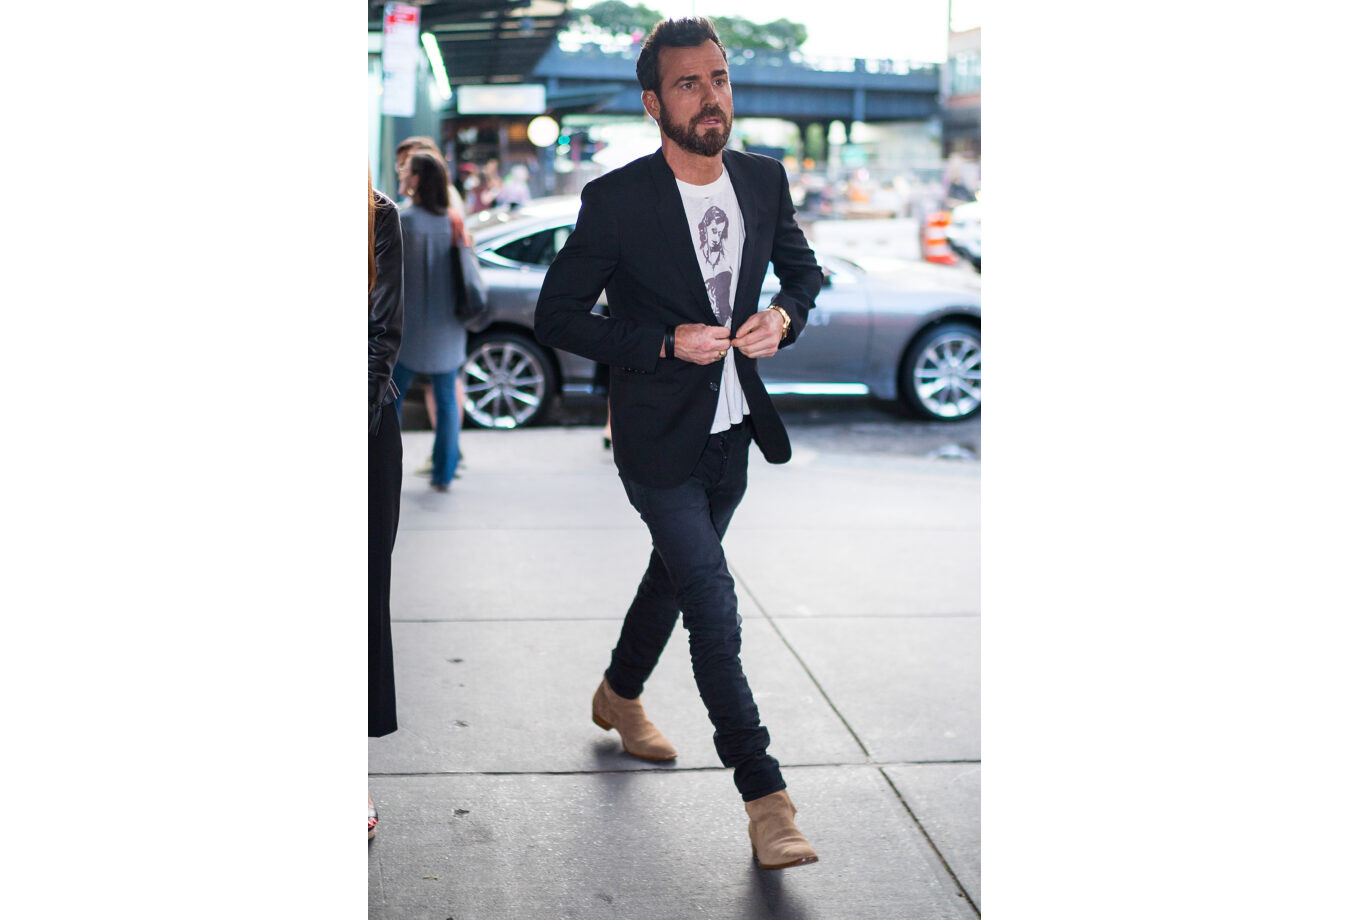 Chelsea boots are the official footwear this fall how to look - The Manual